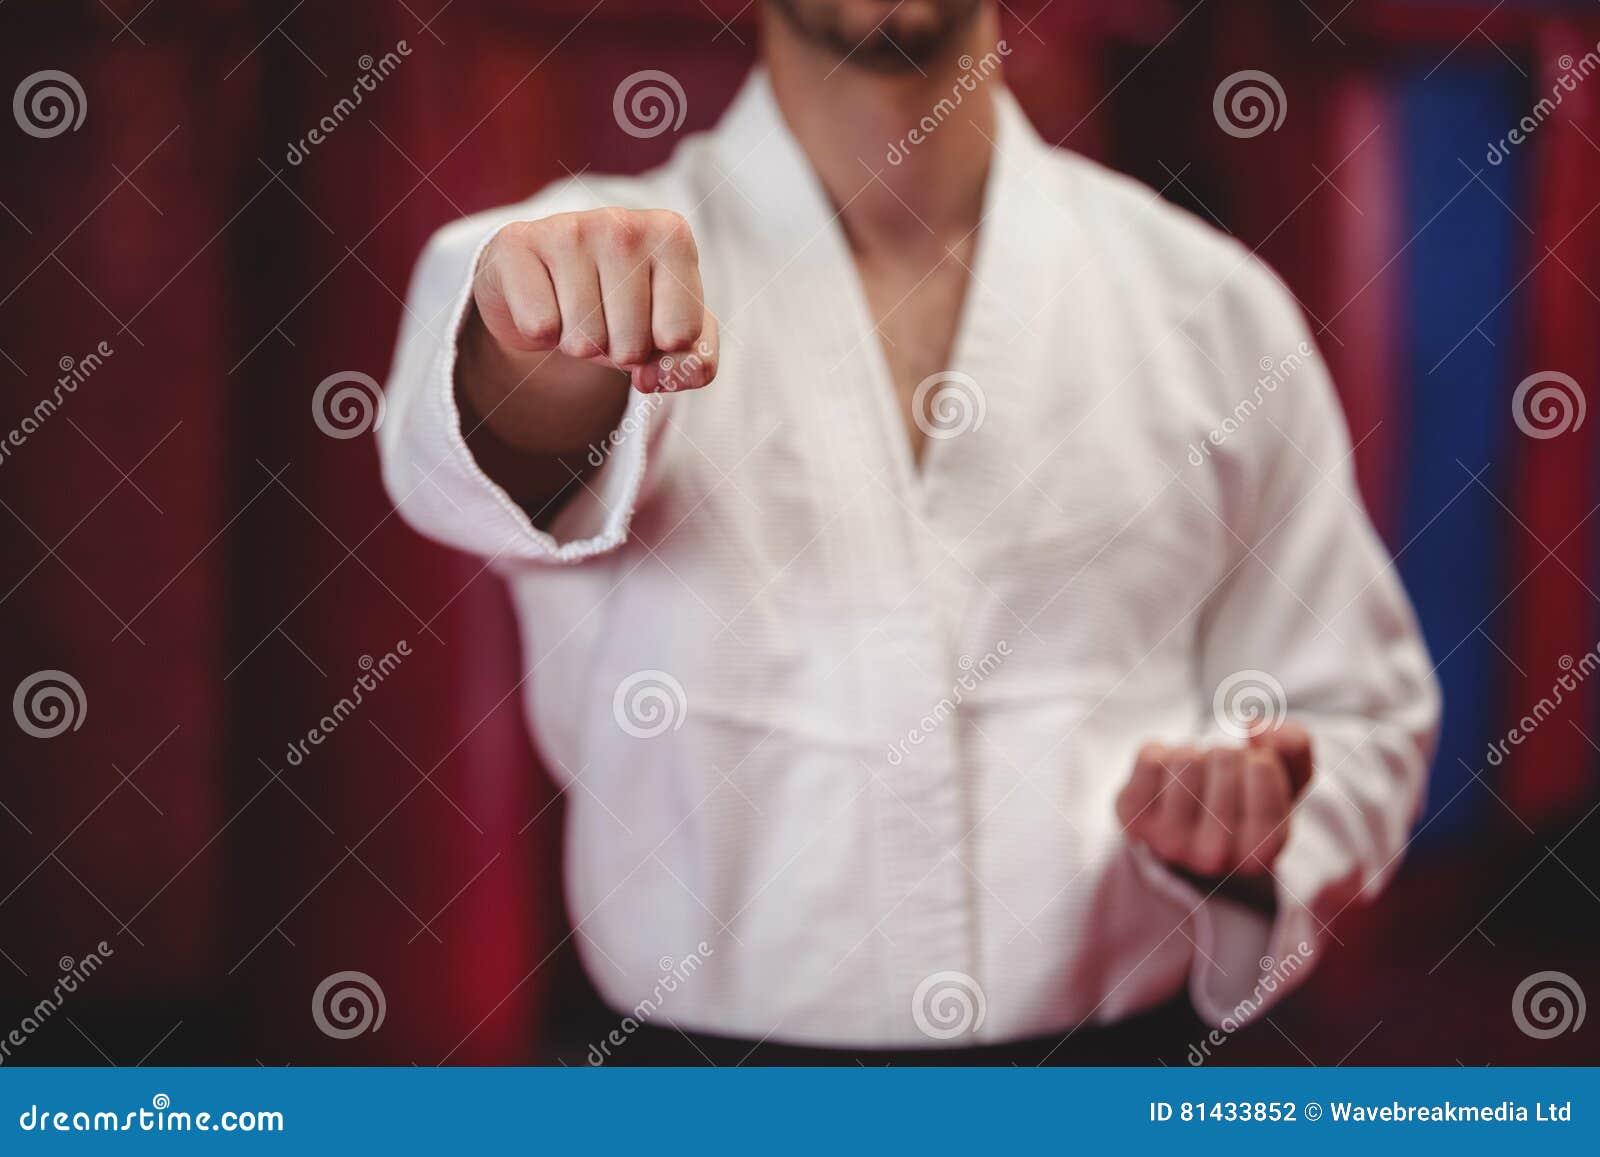 Karate Player in Black Belt Stock Photo - Image of attractive, posing